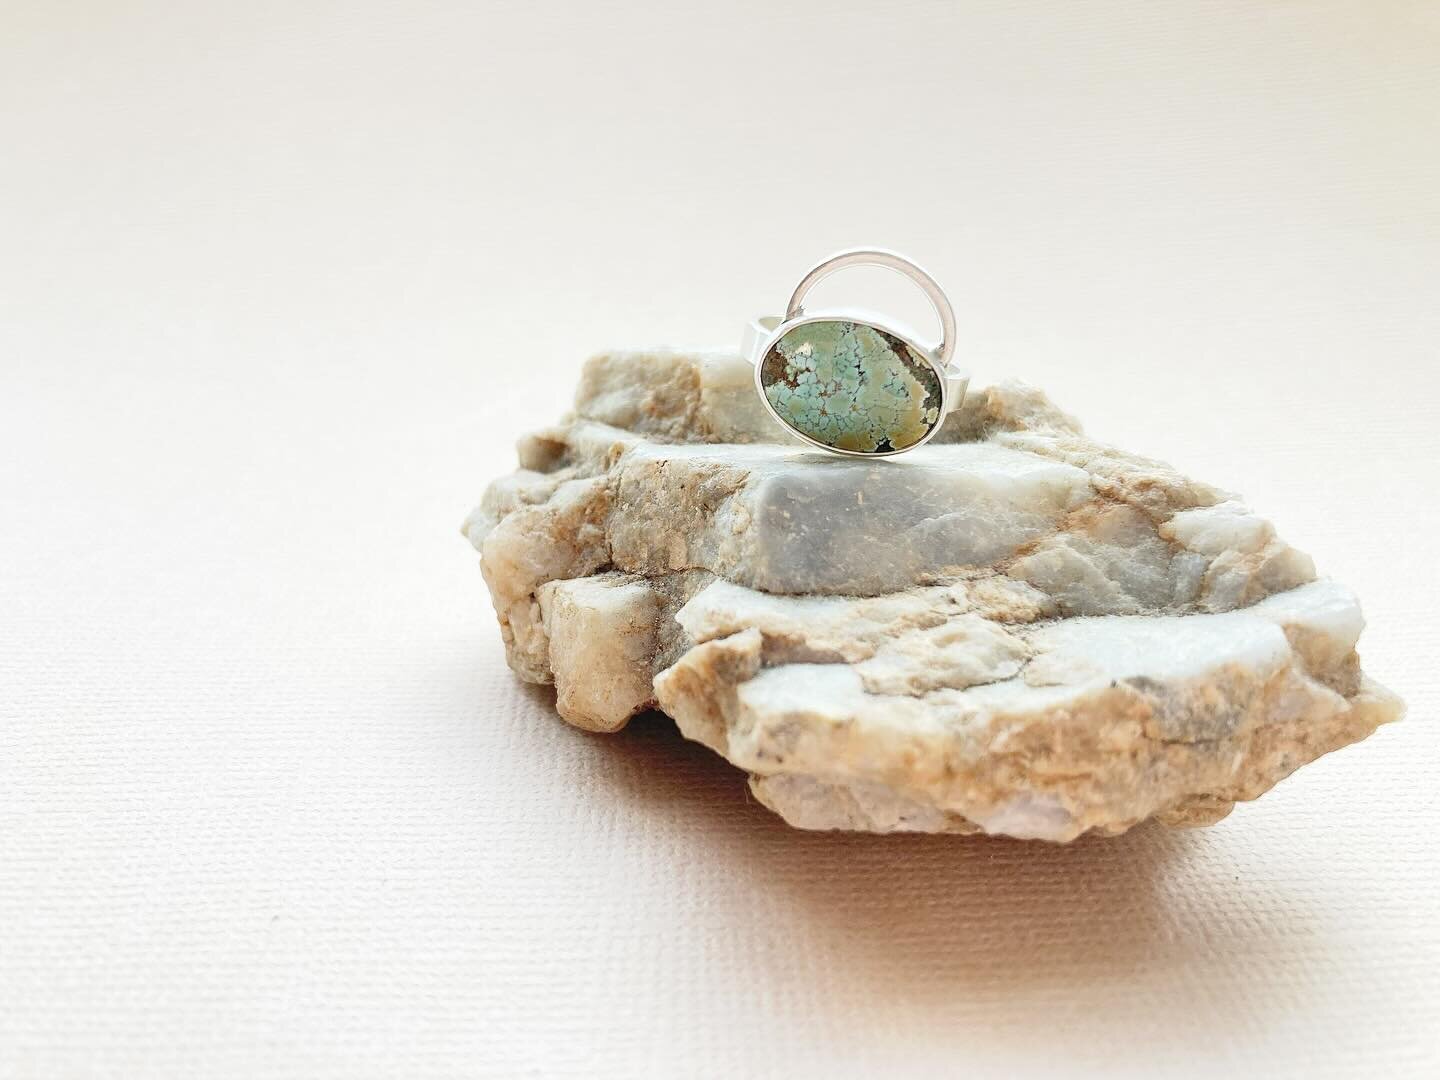 I&rsquo;ve added many one of a kind pieces to the shop, including this gorgeous hubei turquoise ring. The holiday sale is still in full swing, get 20% your entire purchase! Love y&rsquo;all!

#holidaysale #shoplocal #turquoisejewelry #828isgreat #avl